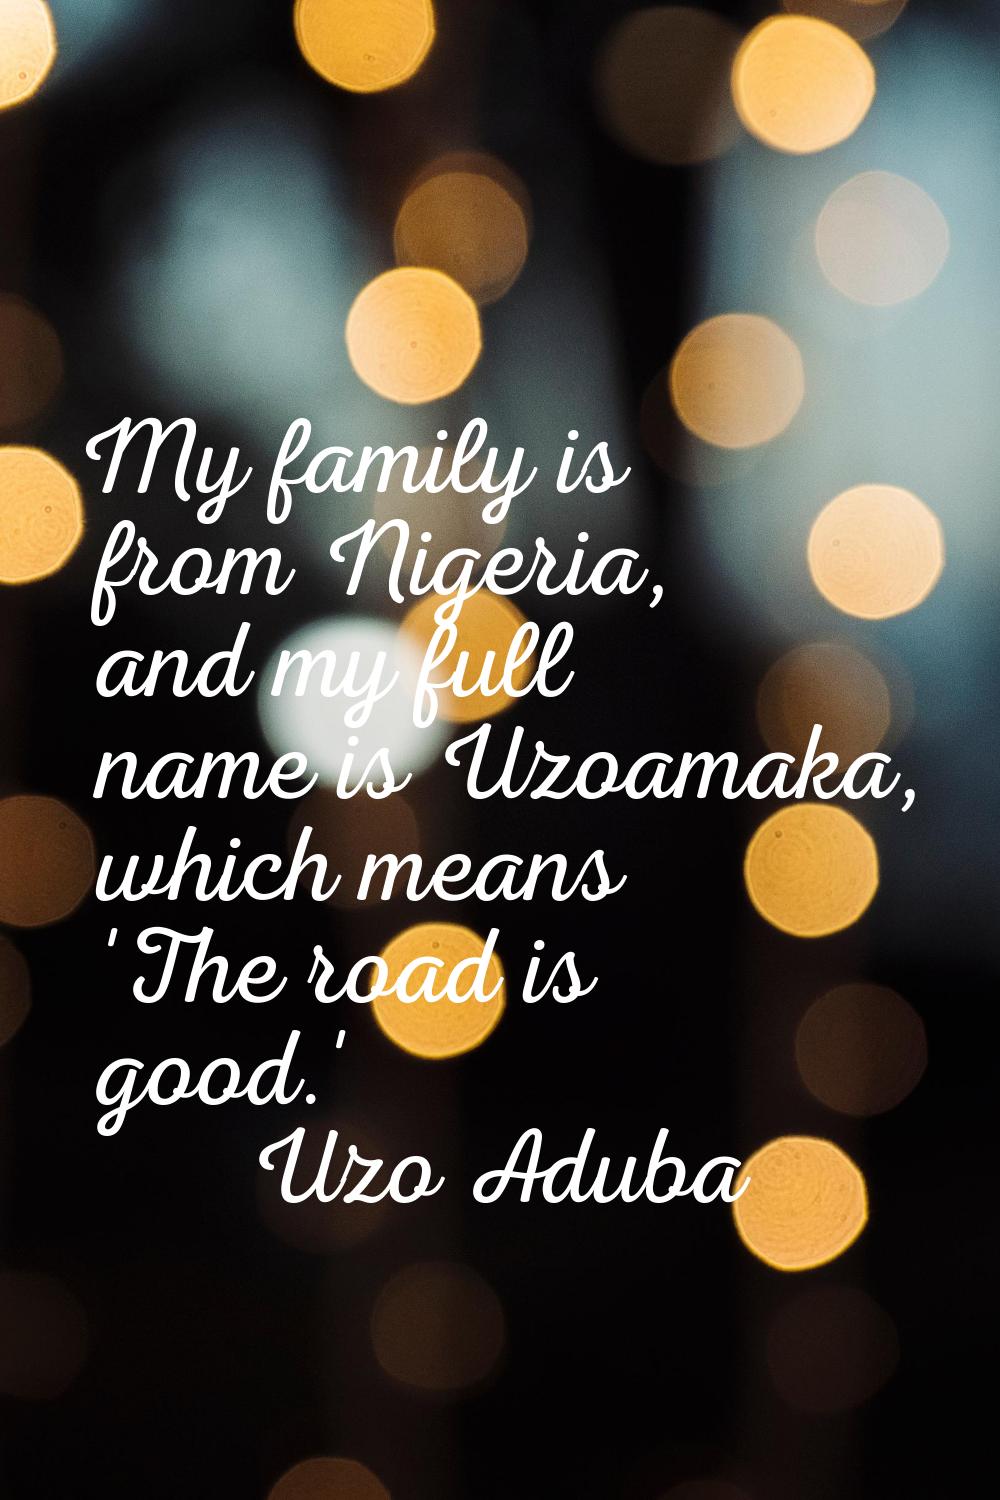 My family is from Nigeria, and my full name is Uzoamaka, which means 'The road is good.'